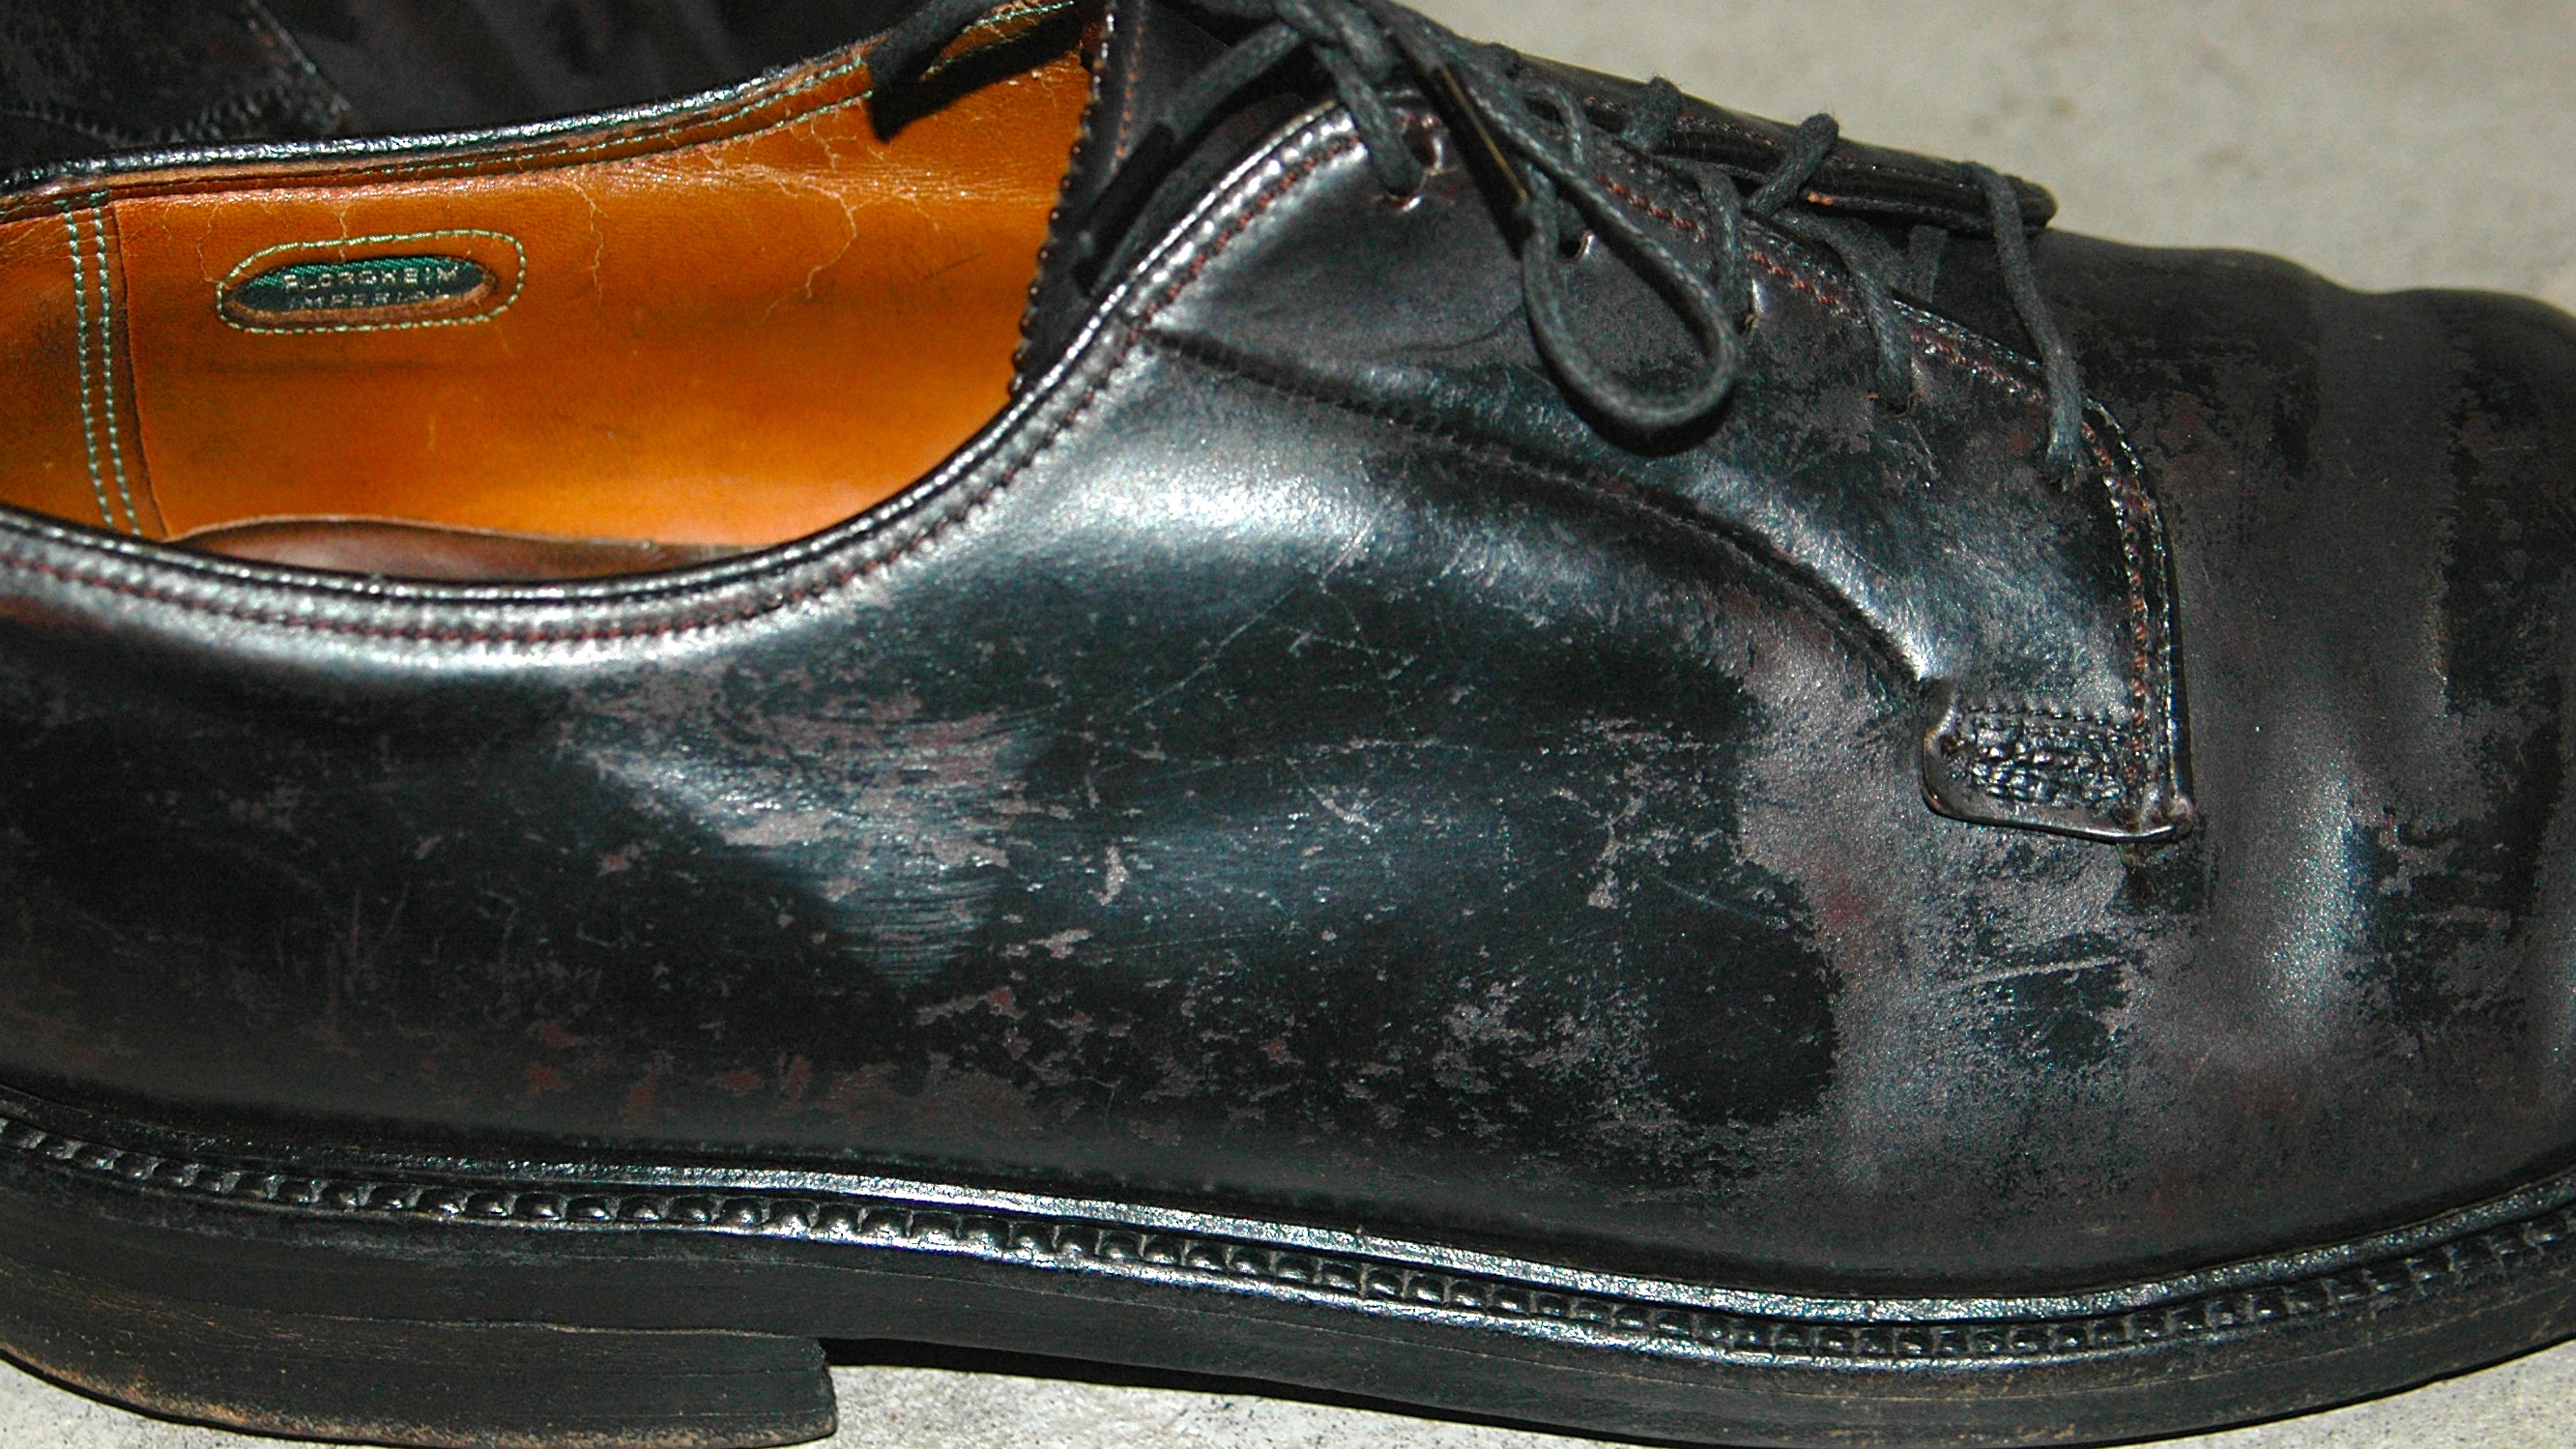 THE TIPS OF YOUR BUTLER FOR WELL MAINTAINING and waxing SHOES of Monsieur &  madam,